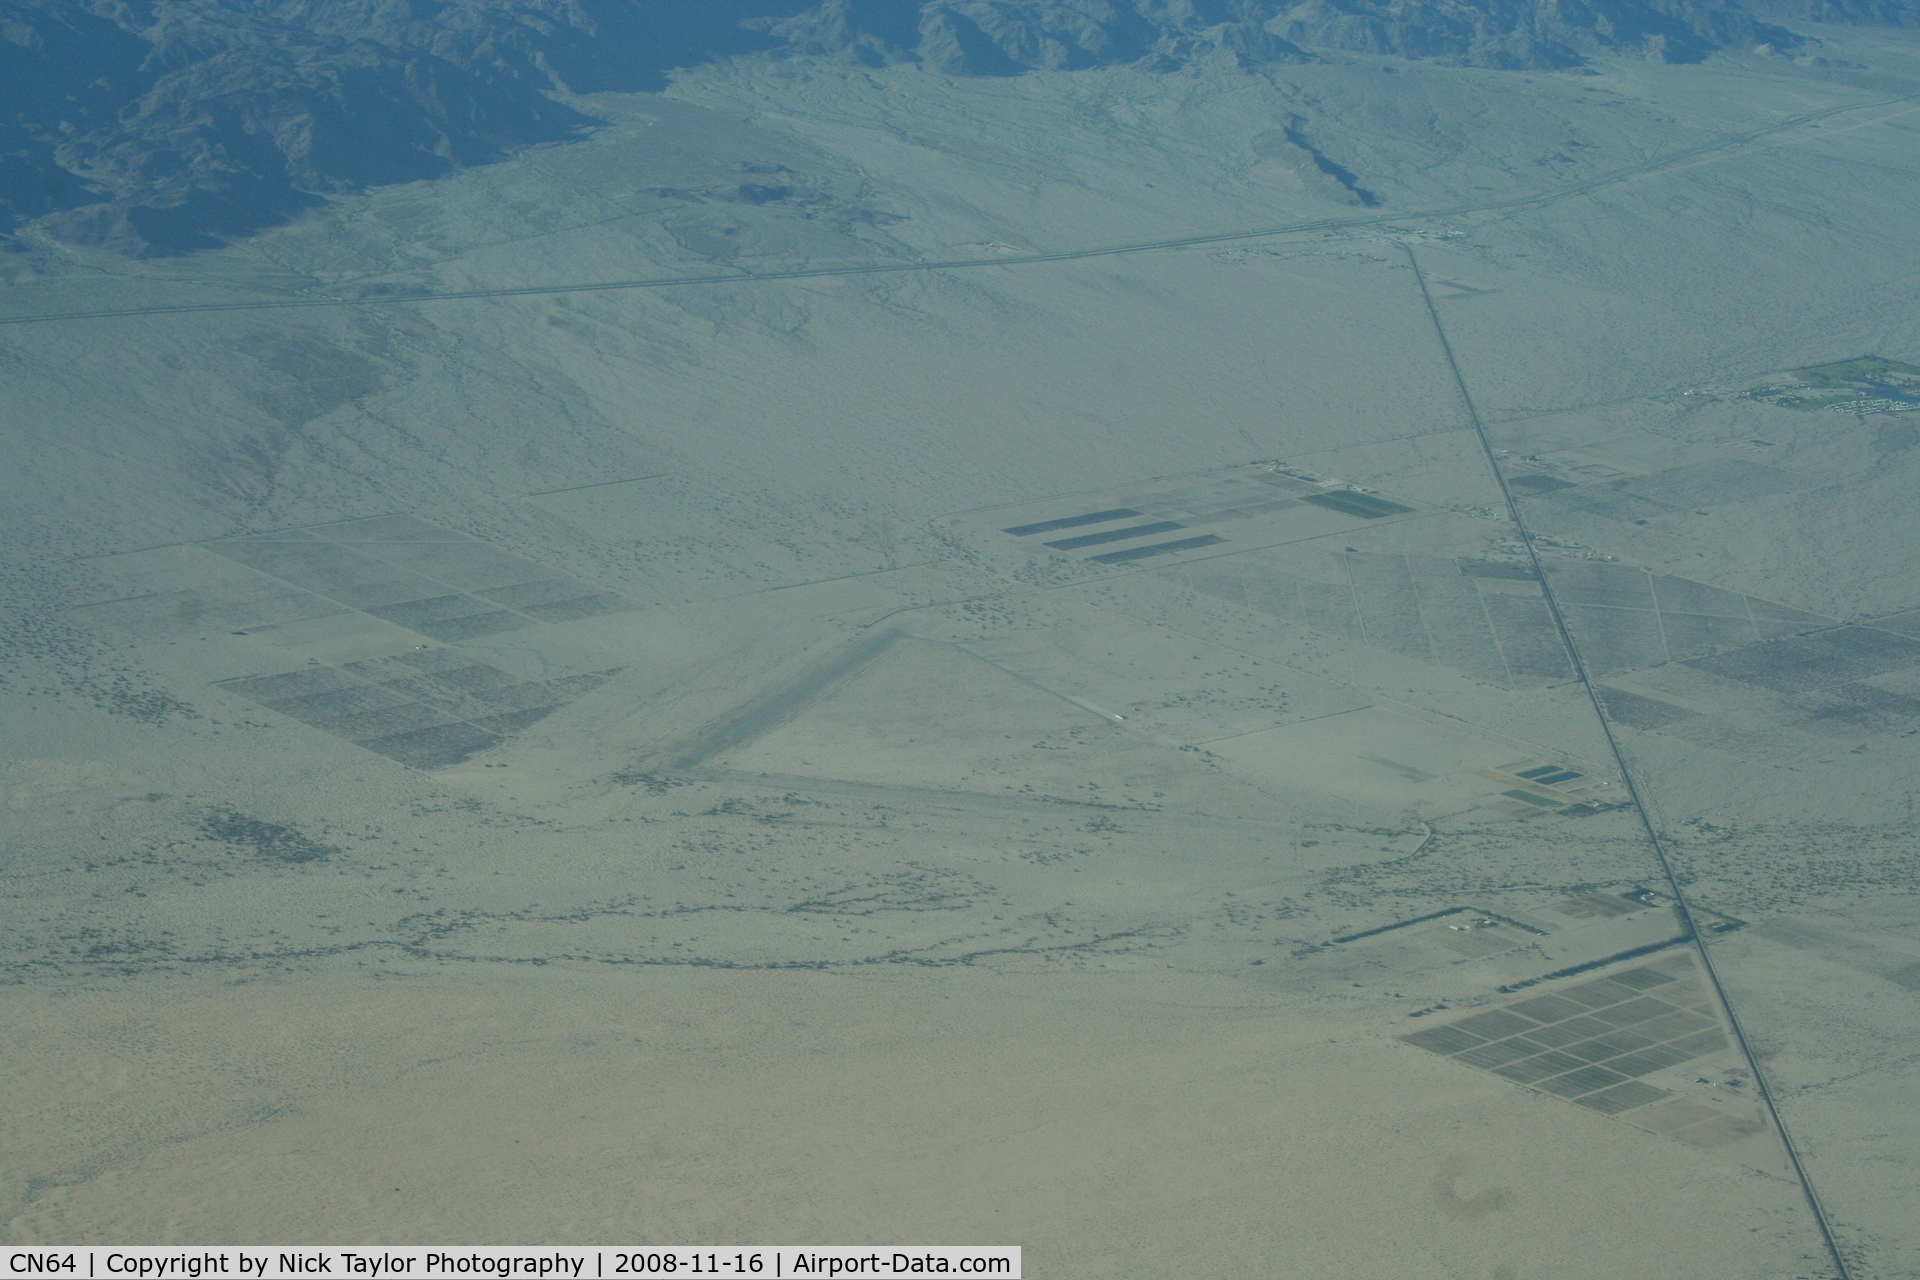 Desert Center Airport (CN64) - Seen from high over the desert. Almost invisible.